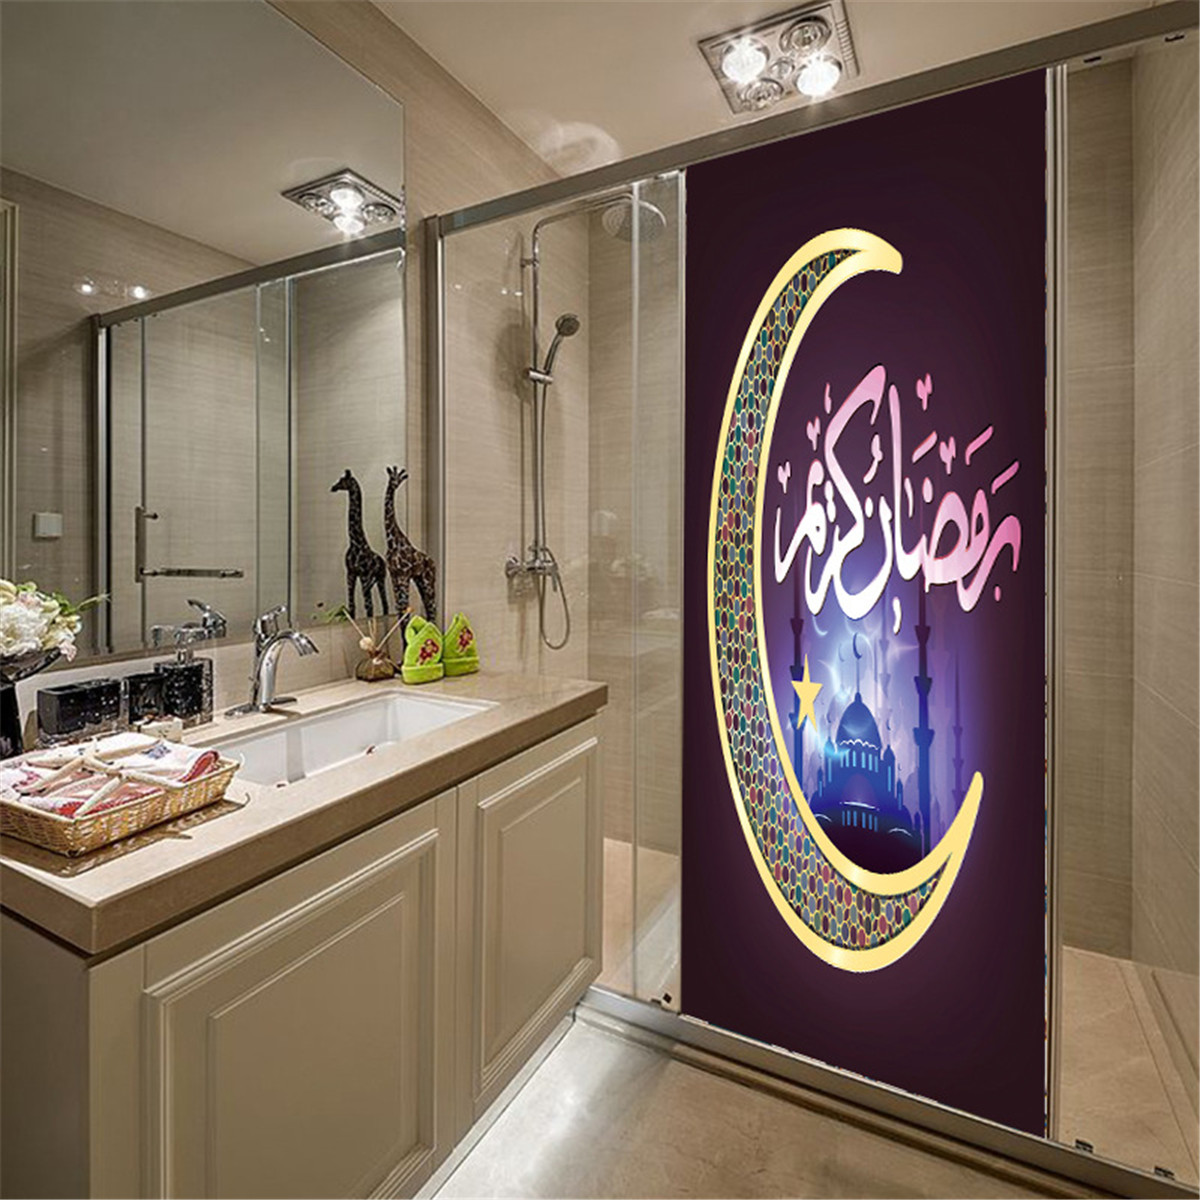 3D-Islamic-Wall-Sticker-Door-Wall-Paper-Removable-Wall-Decal-Office-Home-Living-Room-Bedroom-Decorat-1755284-5